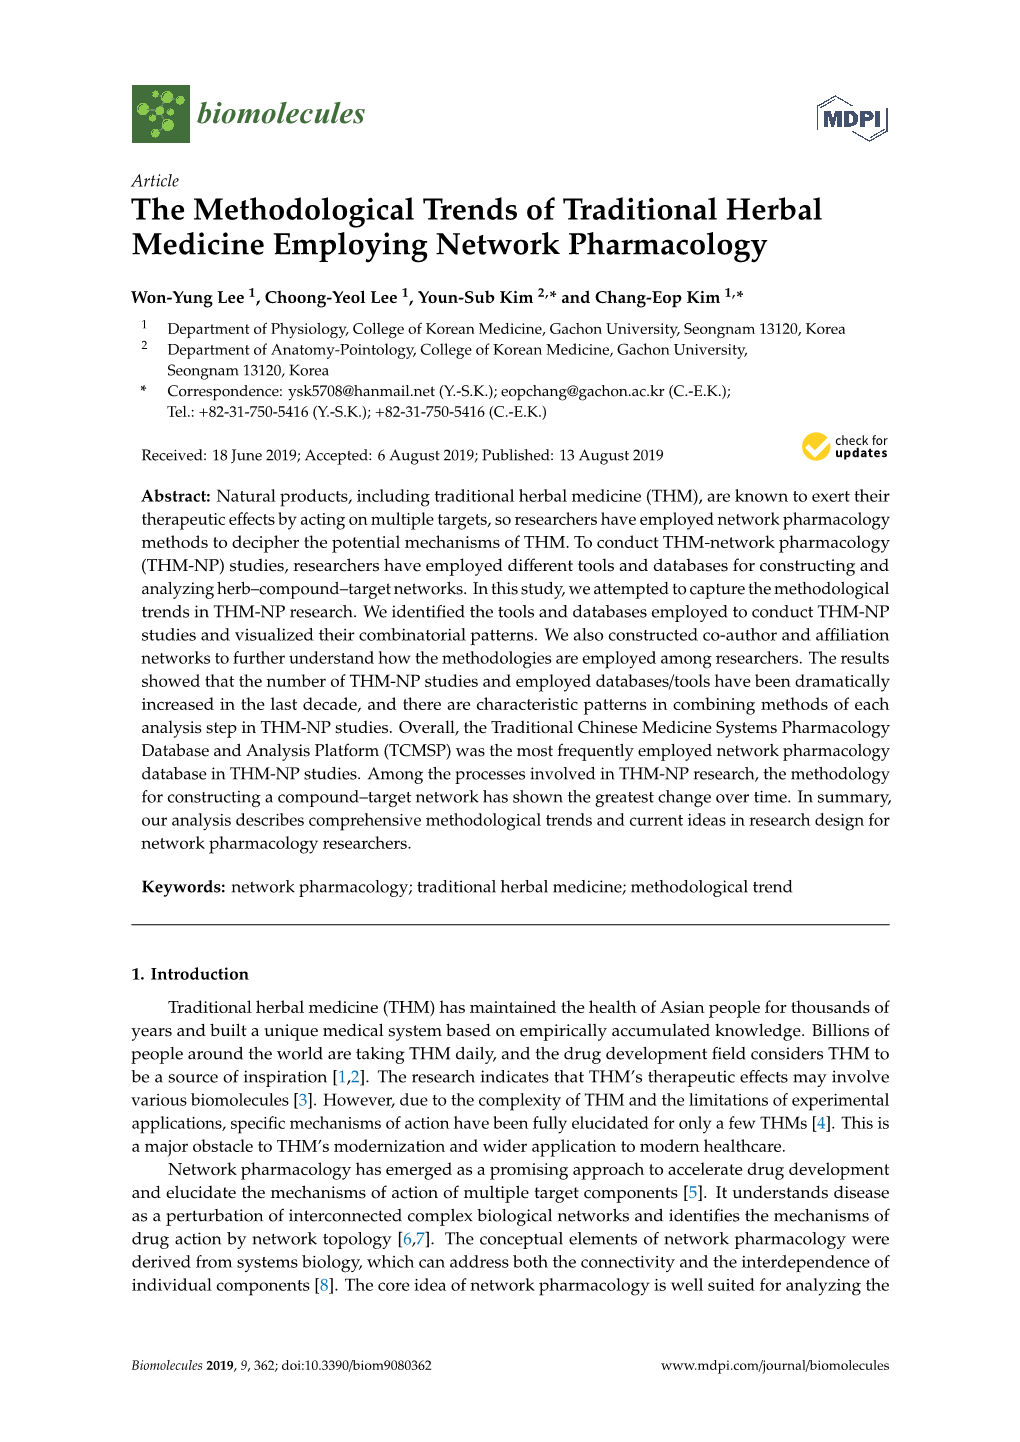 The Methodological Trends of Traditional Herbal Medicine Employing Network Pharmacology